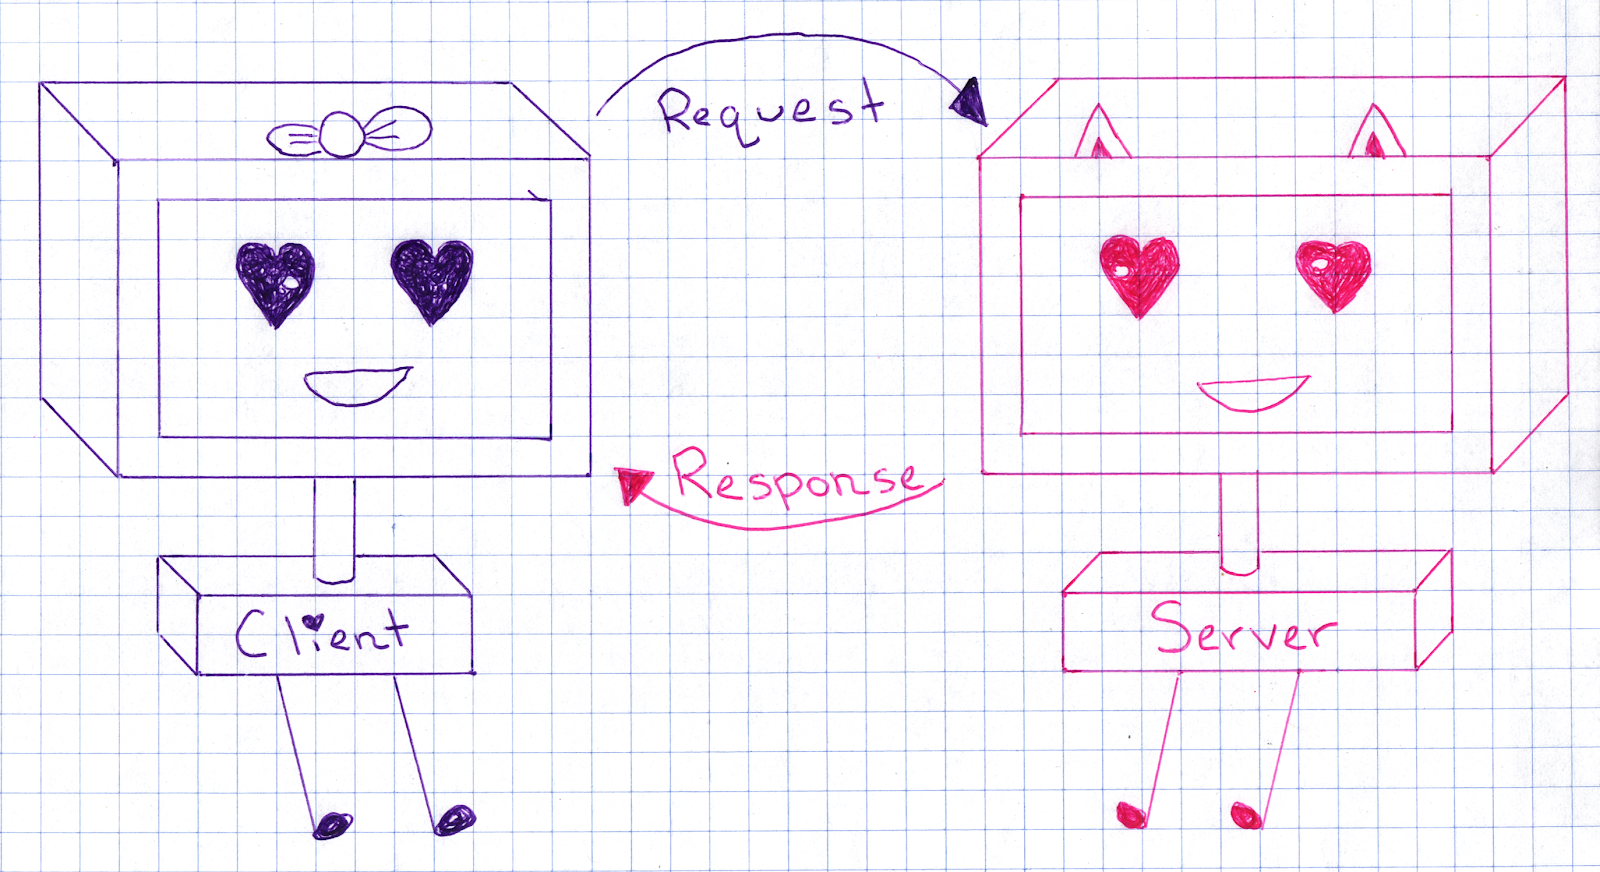 Illustrated diagram of the request-response cycle. A purple computer with heart shaped eyes and feet, labeled "client" has an arrow with the words "request" pointing towards the other computer, which is pink and labeled "server." The server has an arrow pointing back towards the client, with the text "response."